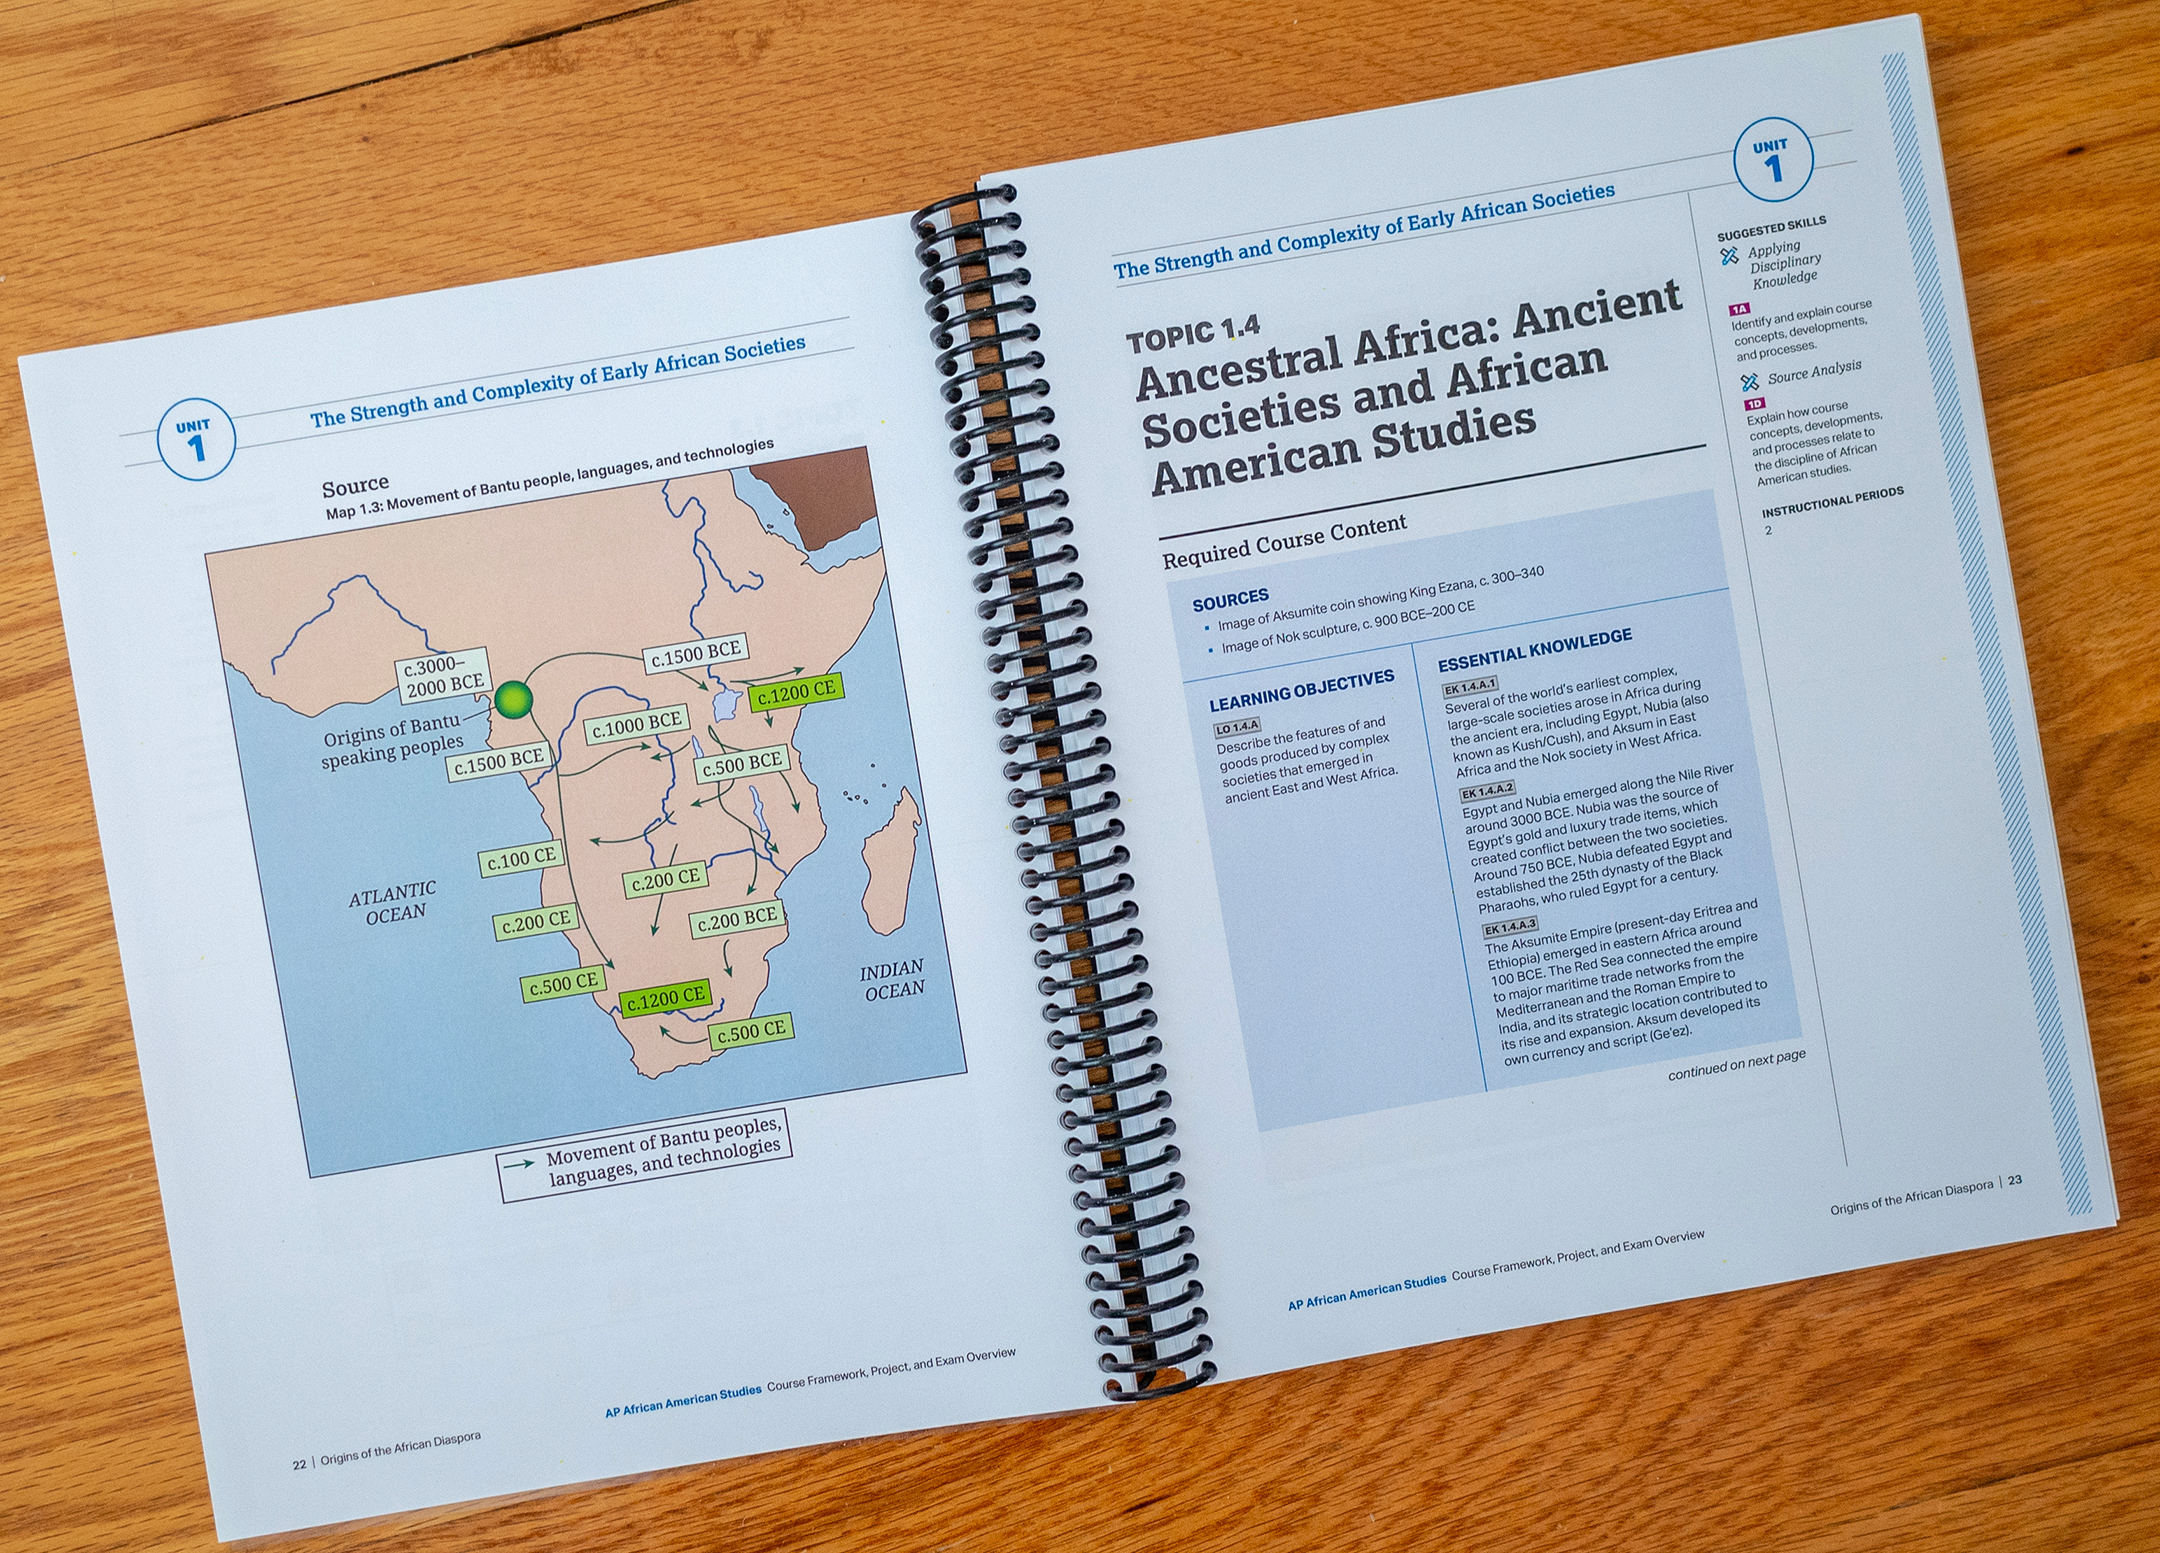 spiral-bound volume opened to show a map of africa on the left and a page of text on the right with the header Topic 1.4 Ancestral Africa: Ancient Societies and African American Studies